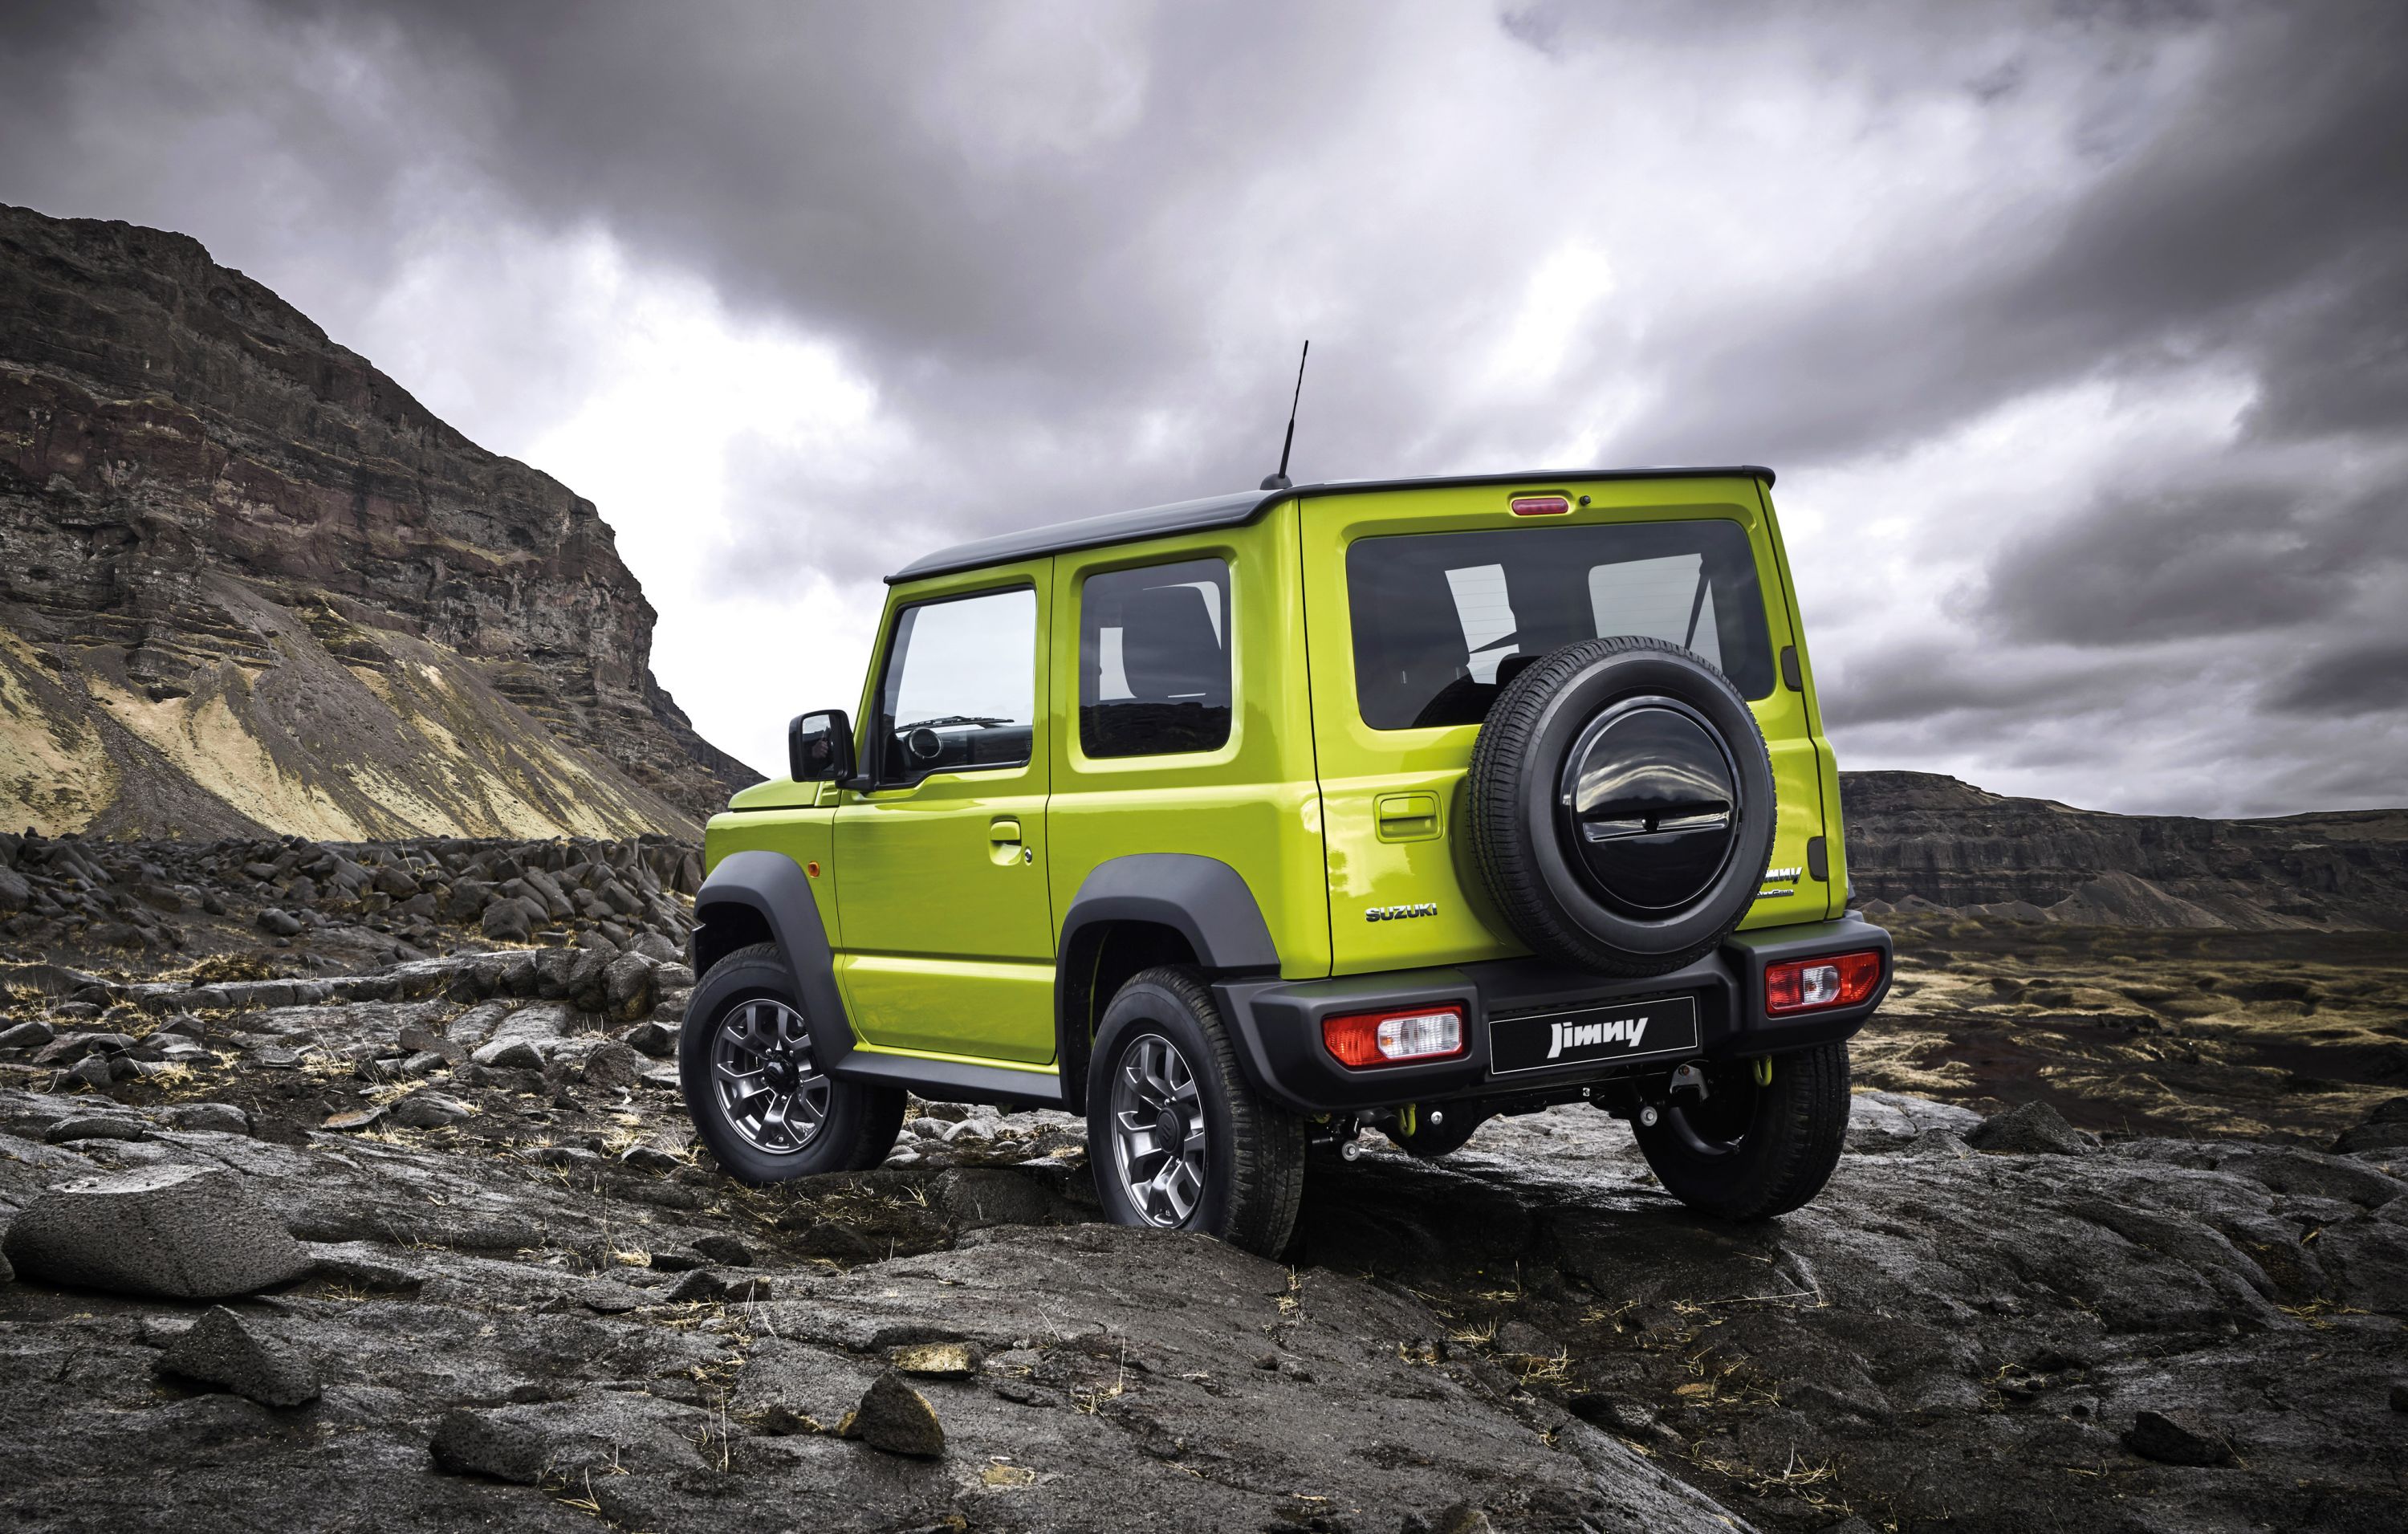 Suzuki Jimny auto sells out in less than five hours